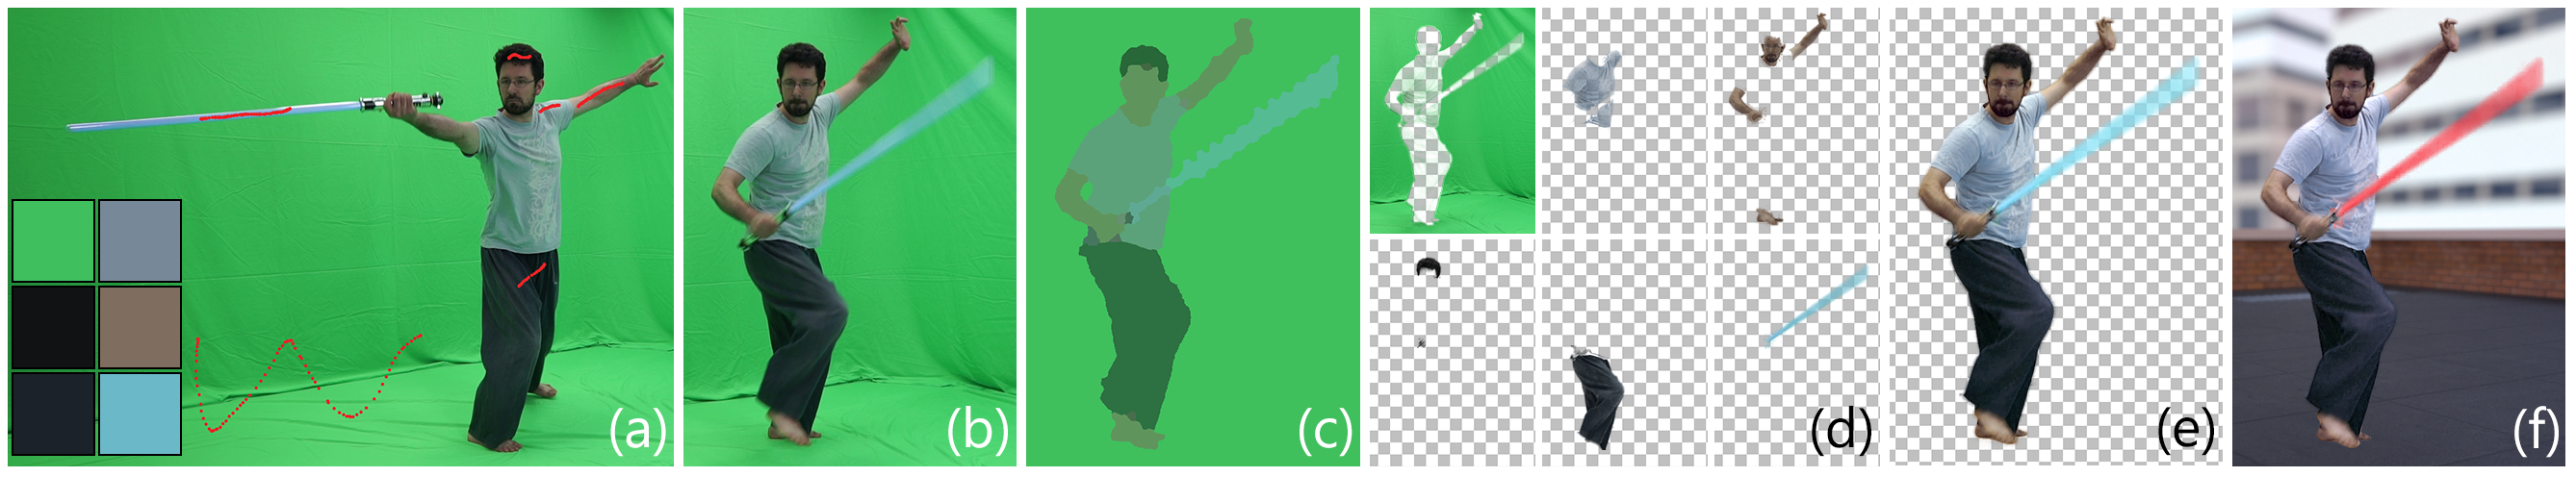 Interactive High-Quality Green-Screen Keying via Color Unmixing